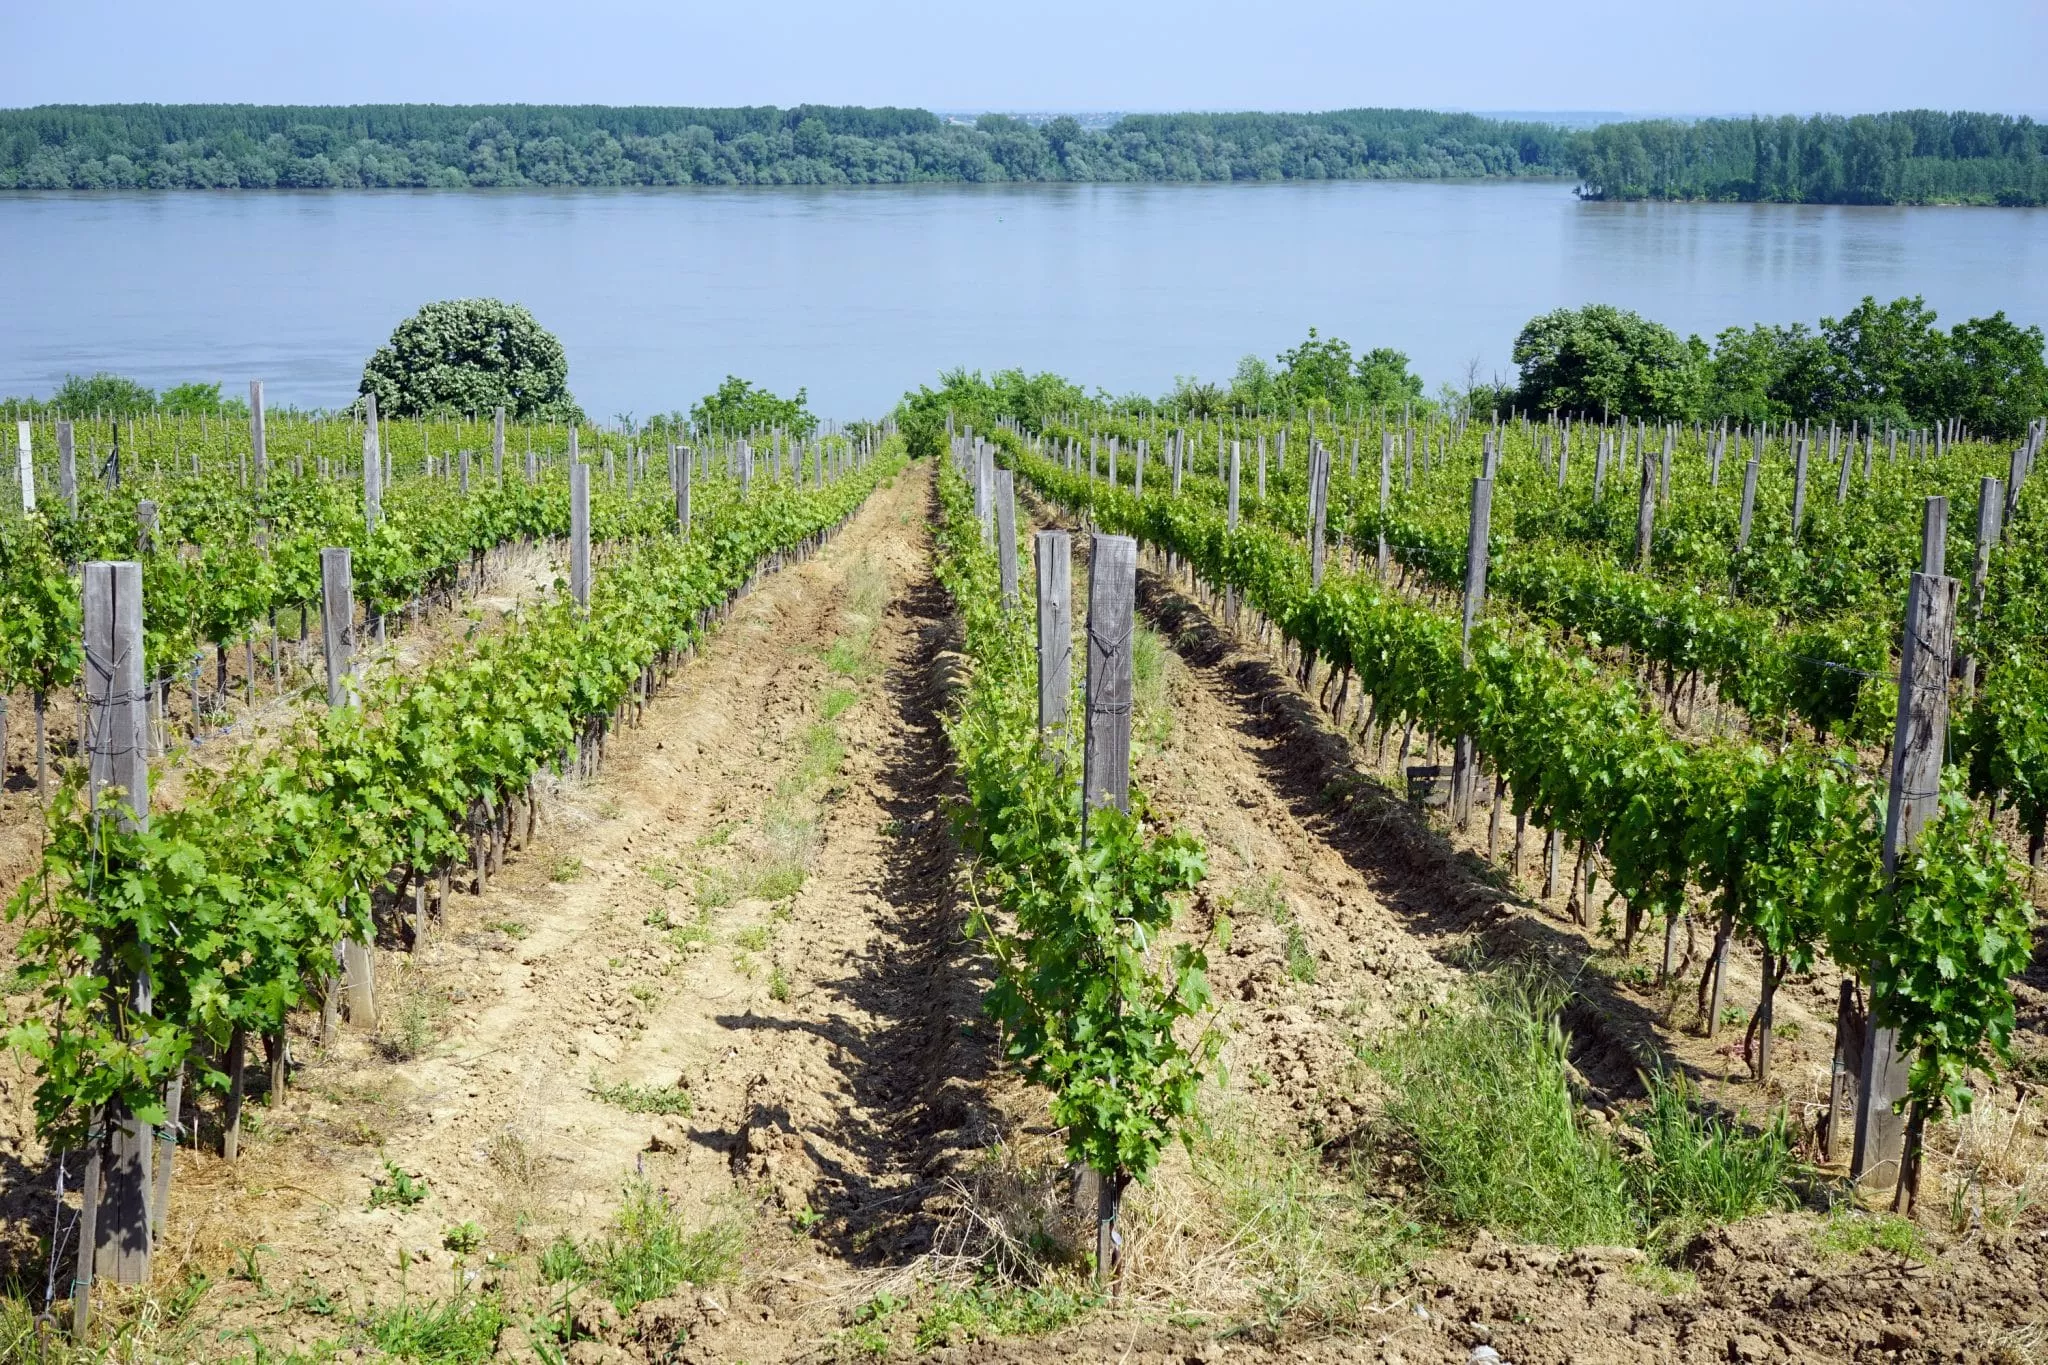 Vineyards-on-the-Danube-River-scaled-2